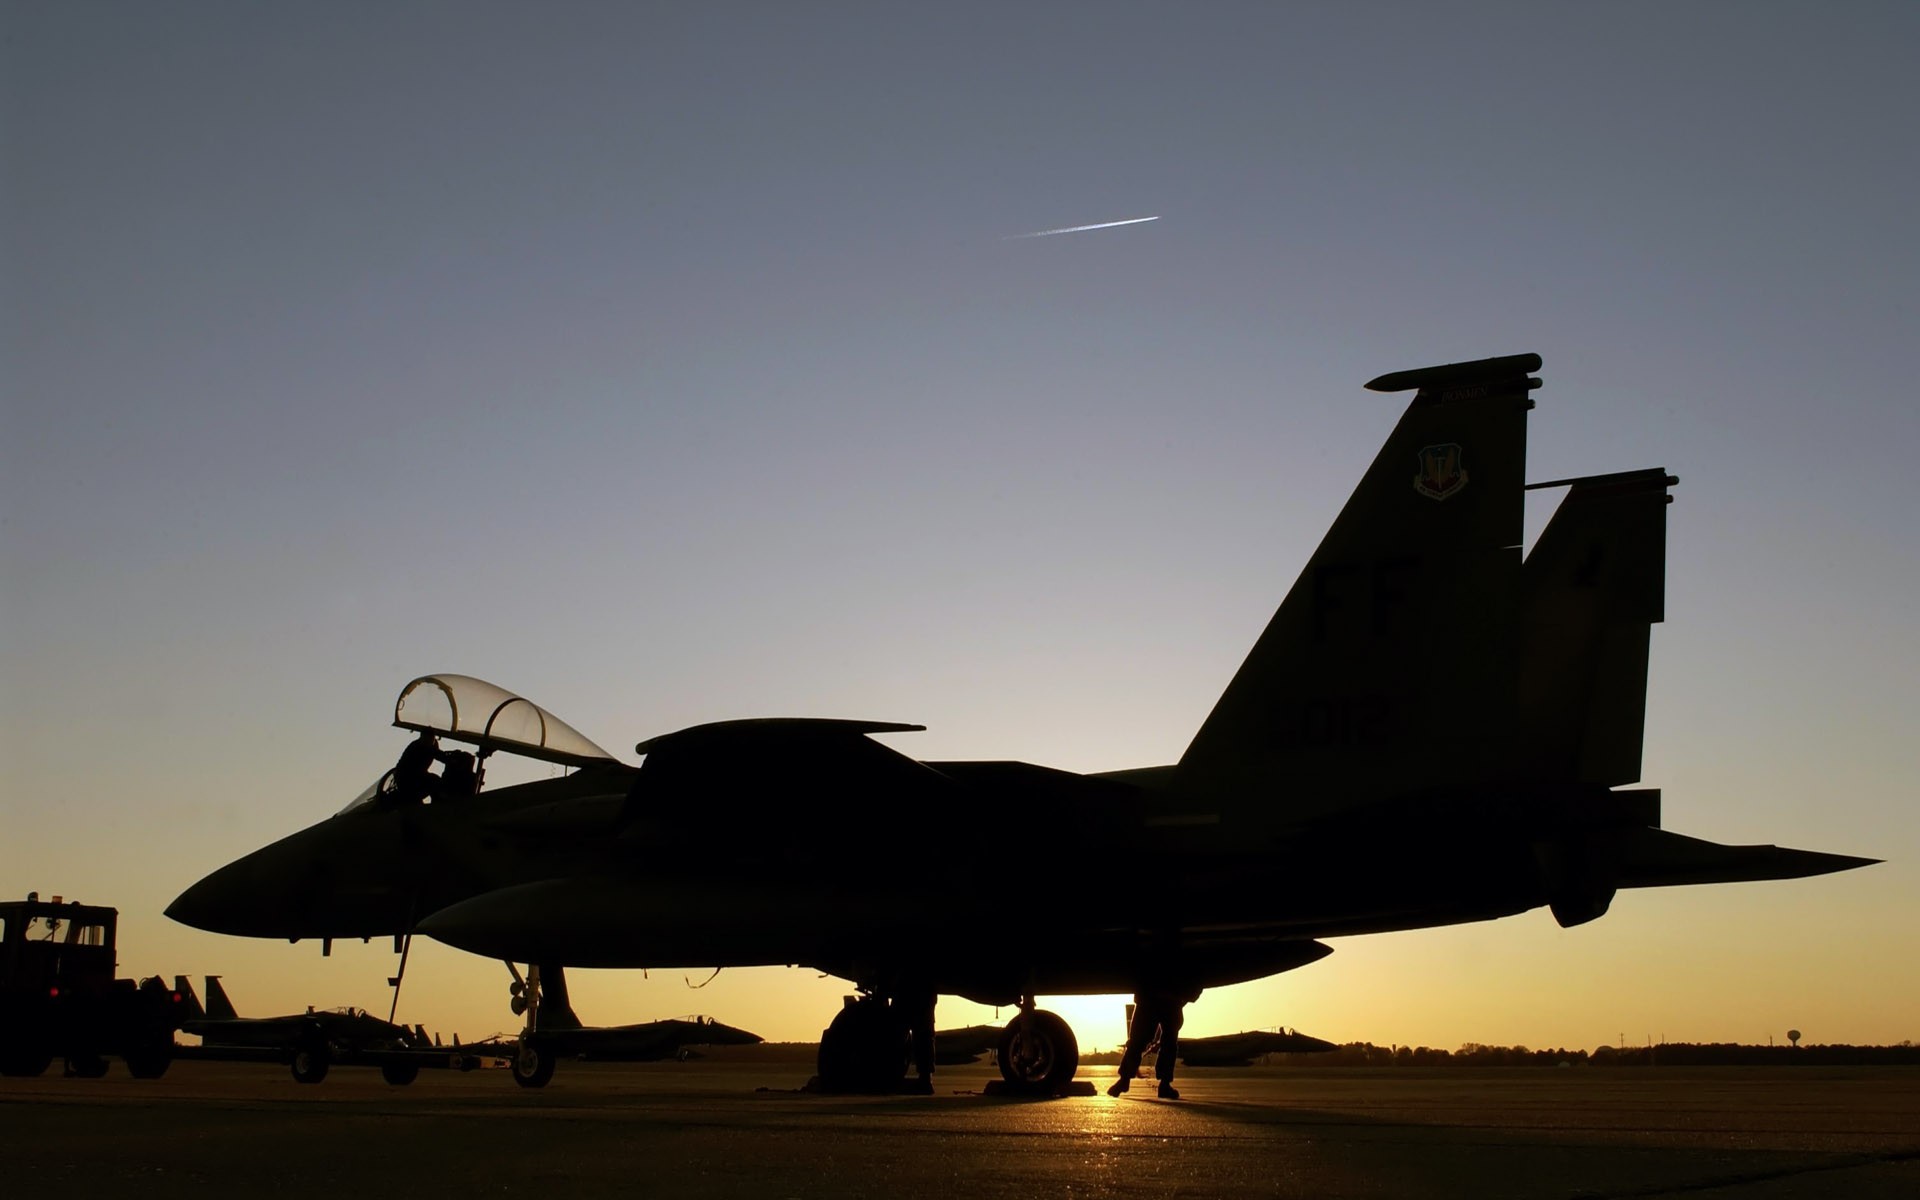 General 1920x1200 airplane silhouette contrails F-15 Eagle jet fighter military vehicle vehicle military aircraft McDonnell Douglas military sunset American aircraft sunset glow